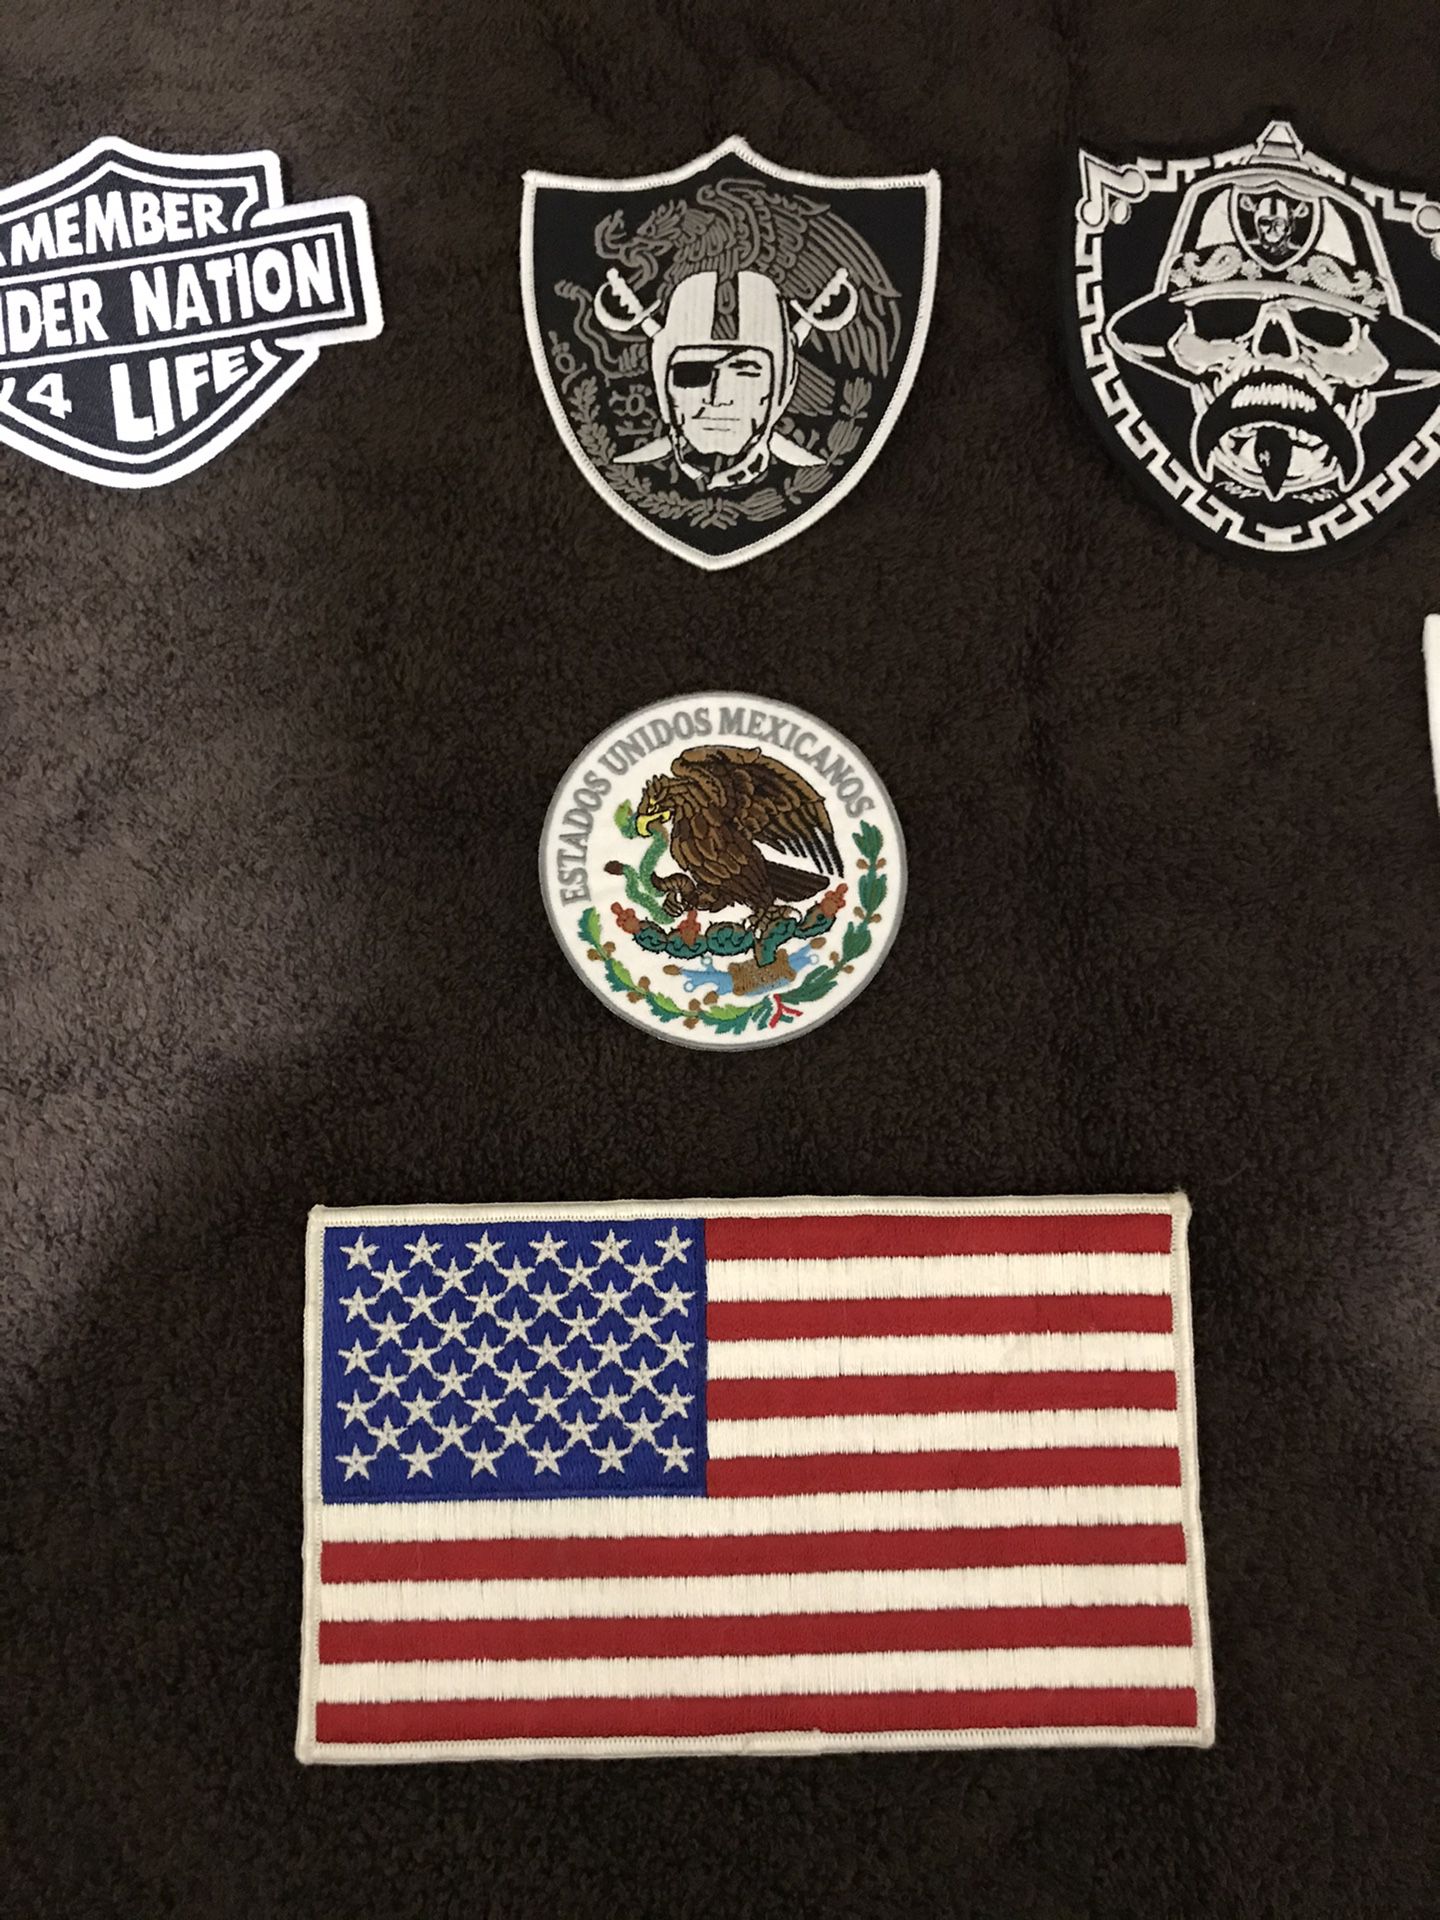 Raiders patch’s